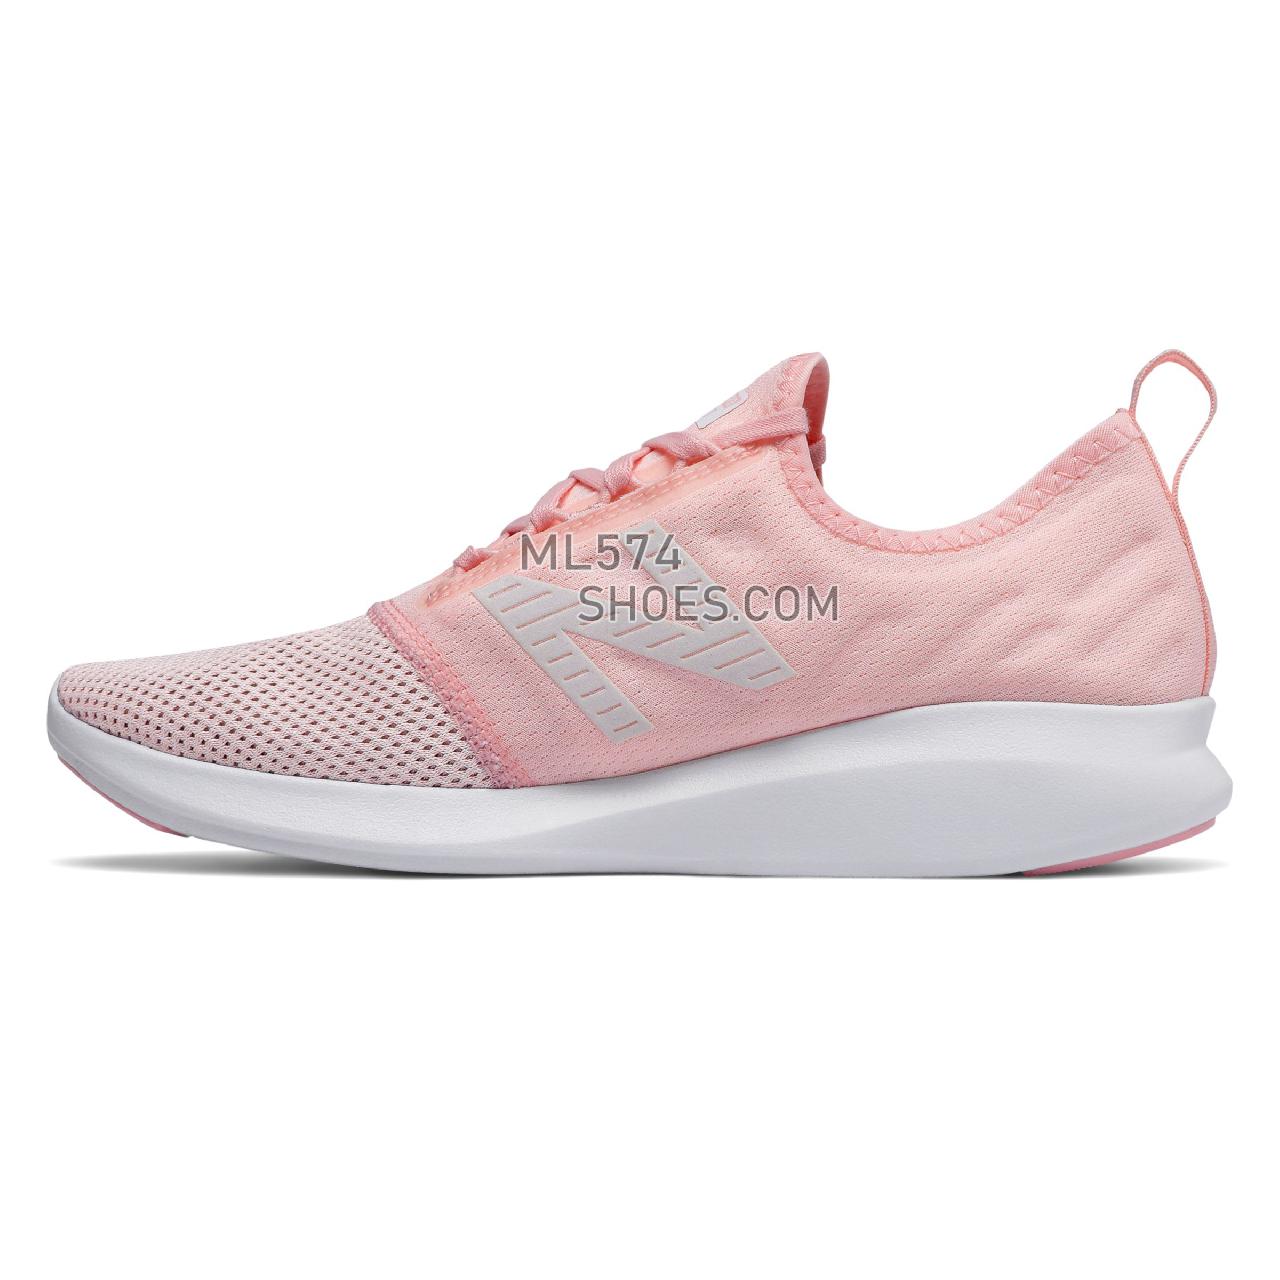 New Balance FuelCore Coast v4 - Women's 4 - Running Himalayan Pink with Conch Shell - WCSTLLA4